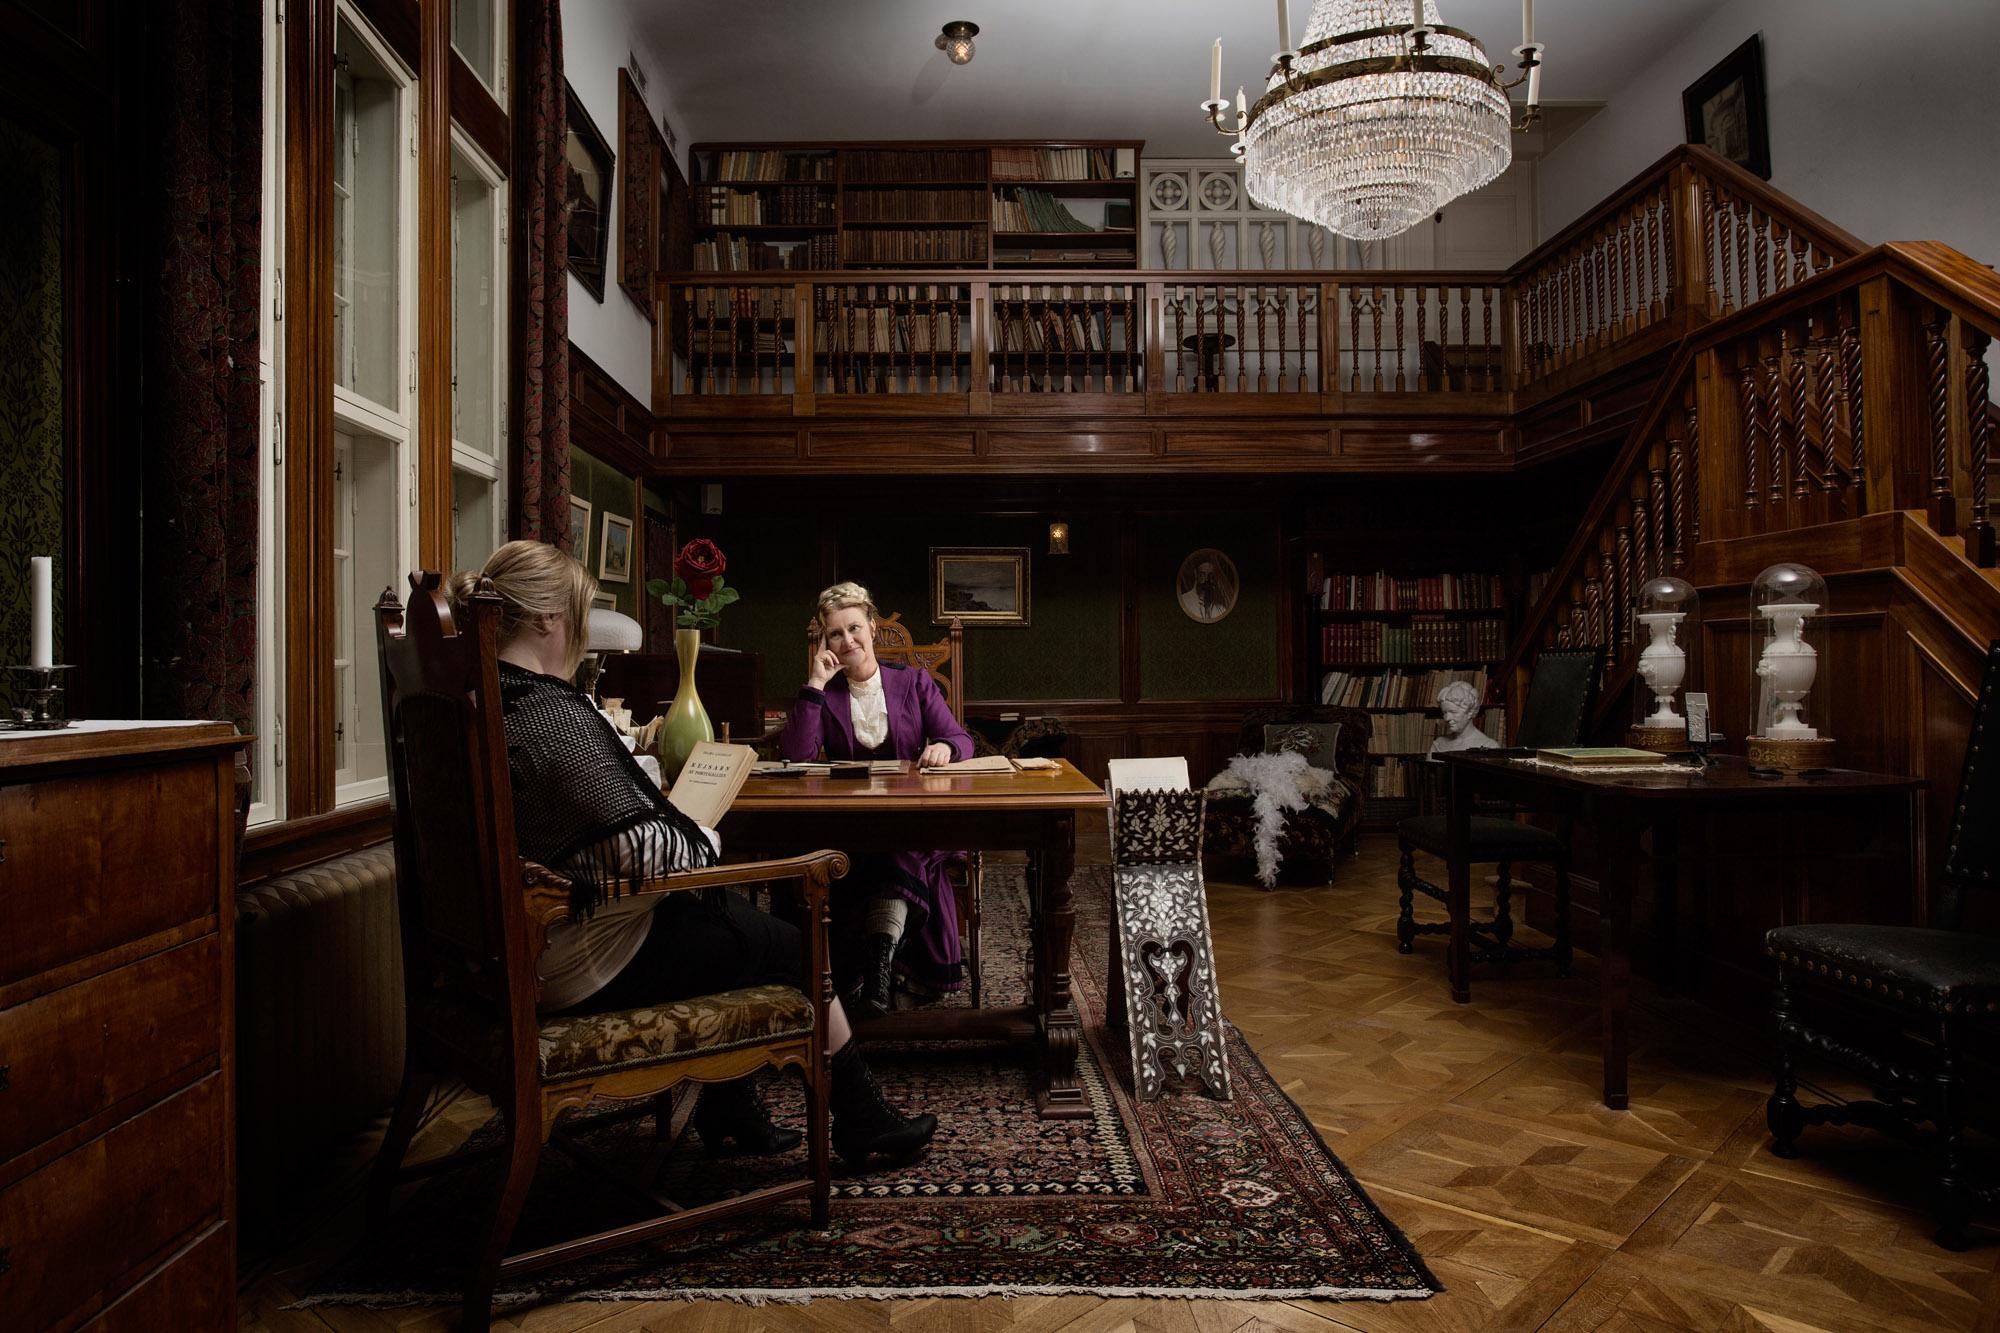 The exhibition “Selma in Falun” shows Selma and Valborg in Semla Lagerlöfs library and workroom. – © Ryan Garrison